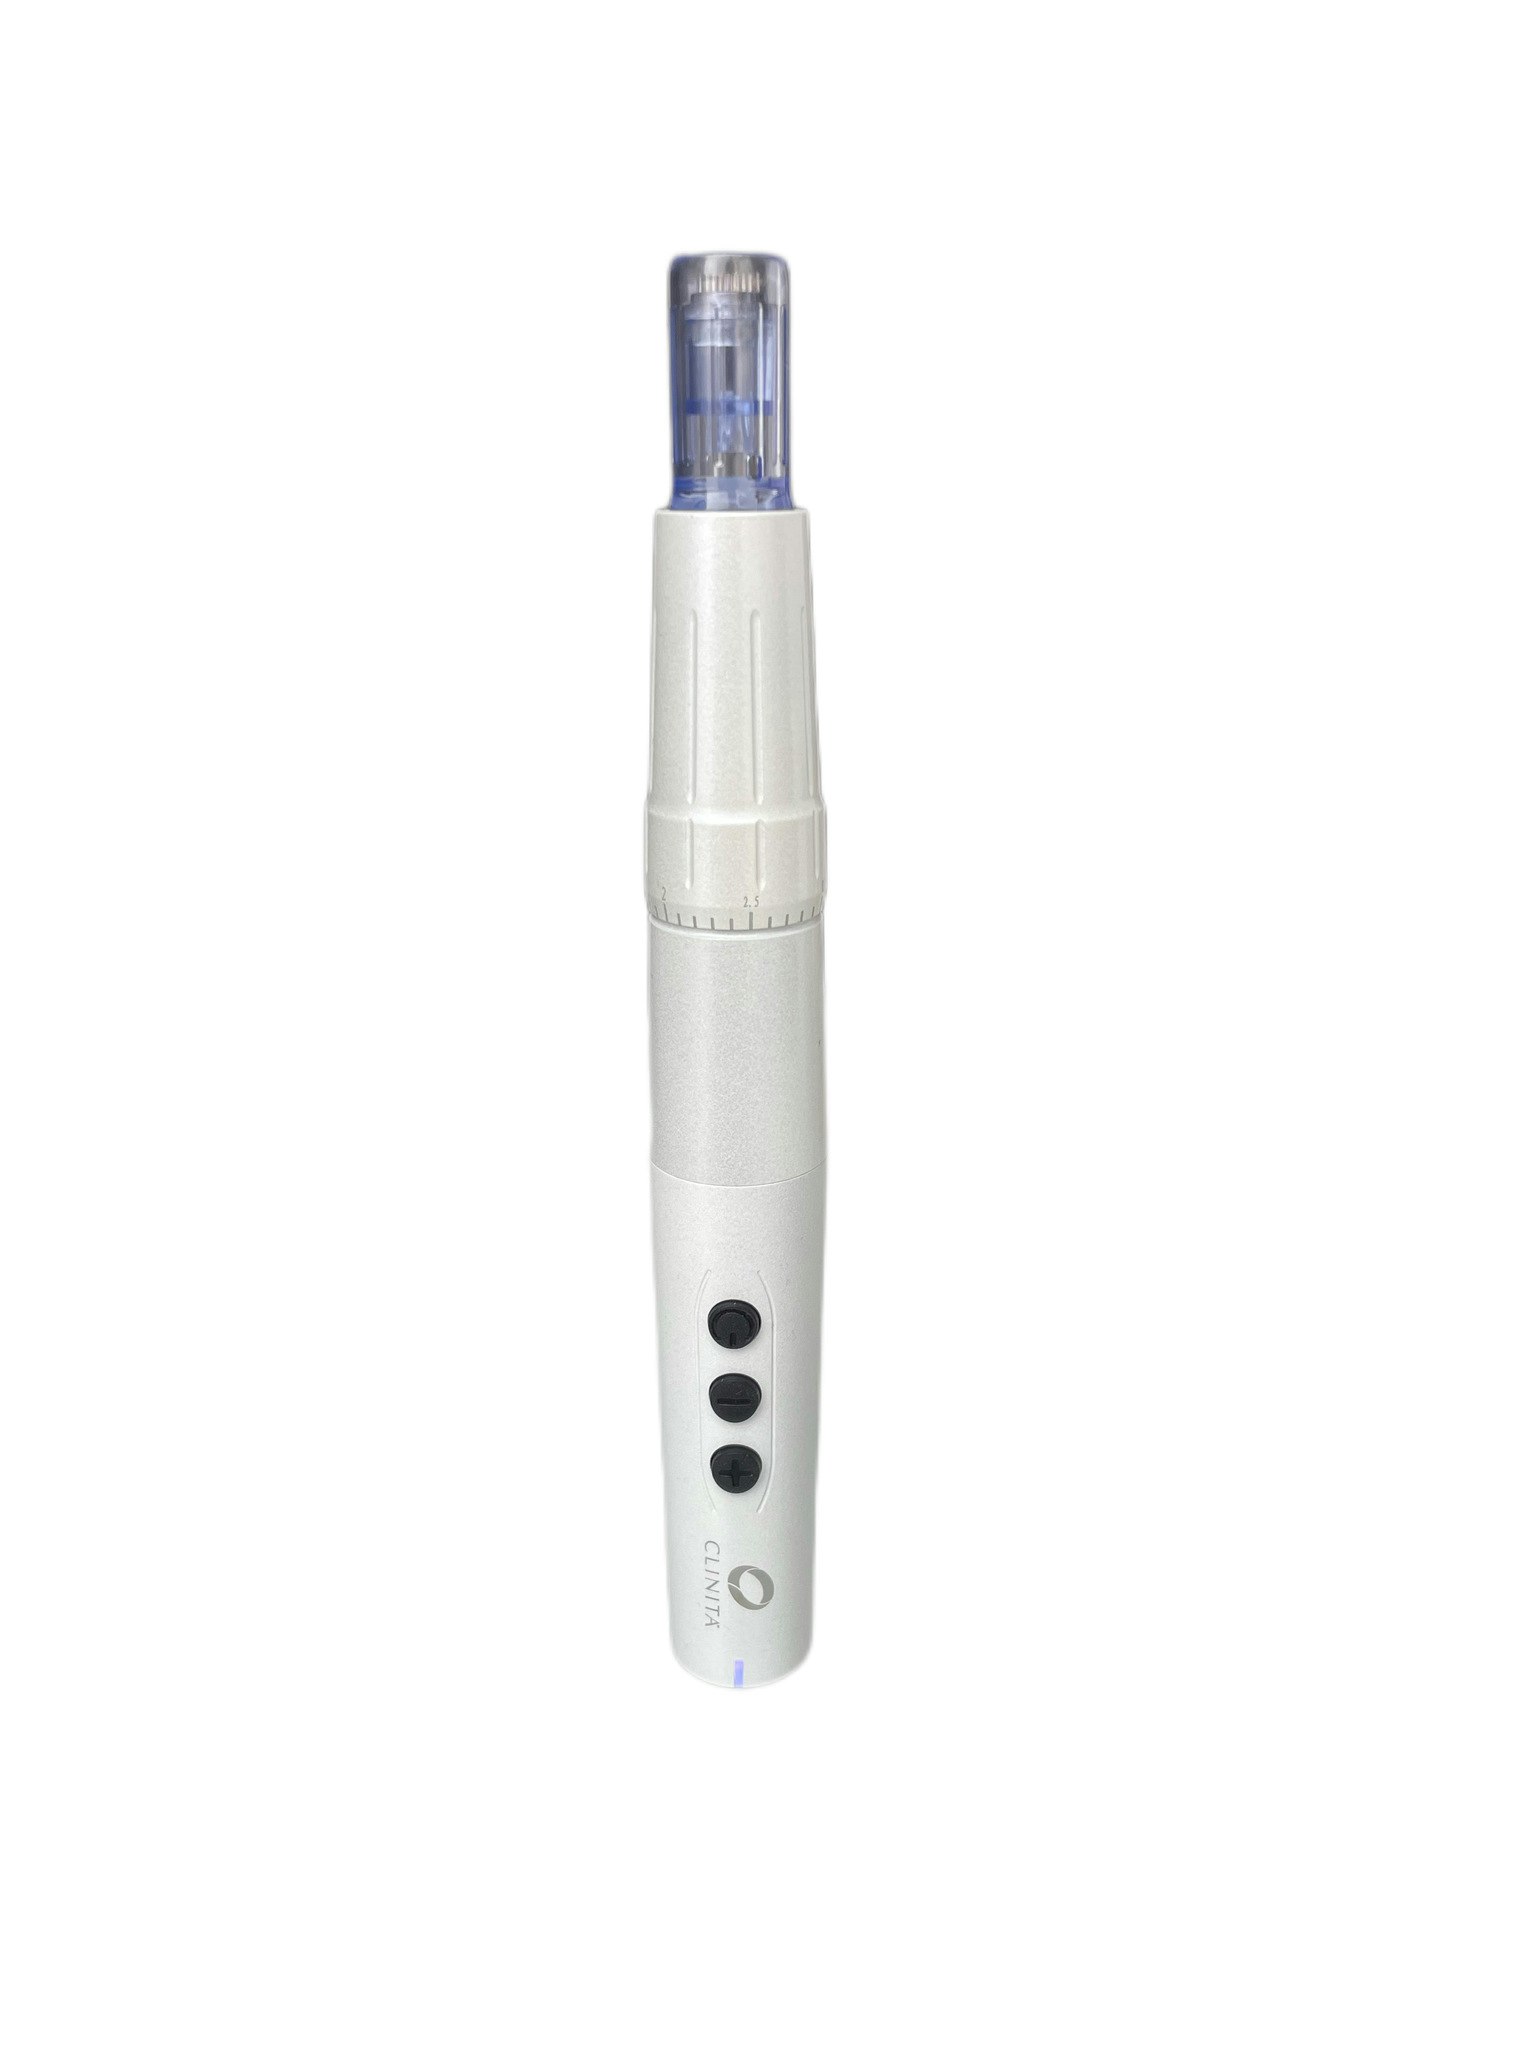 FLY Microneedling 12 point